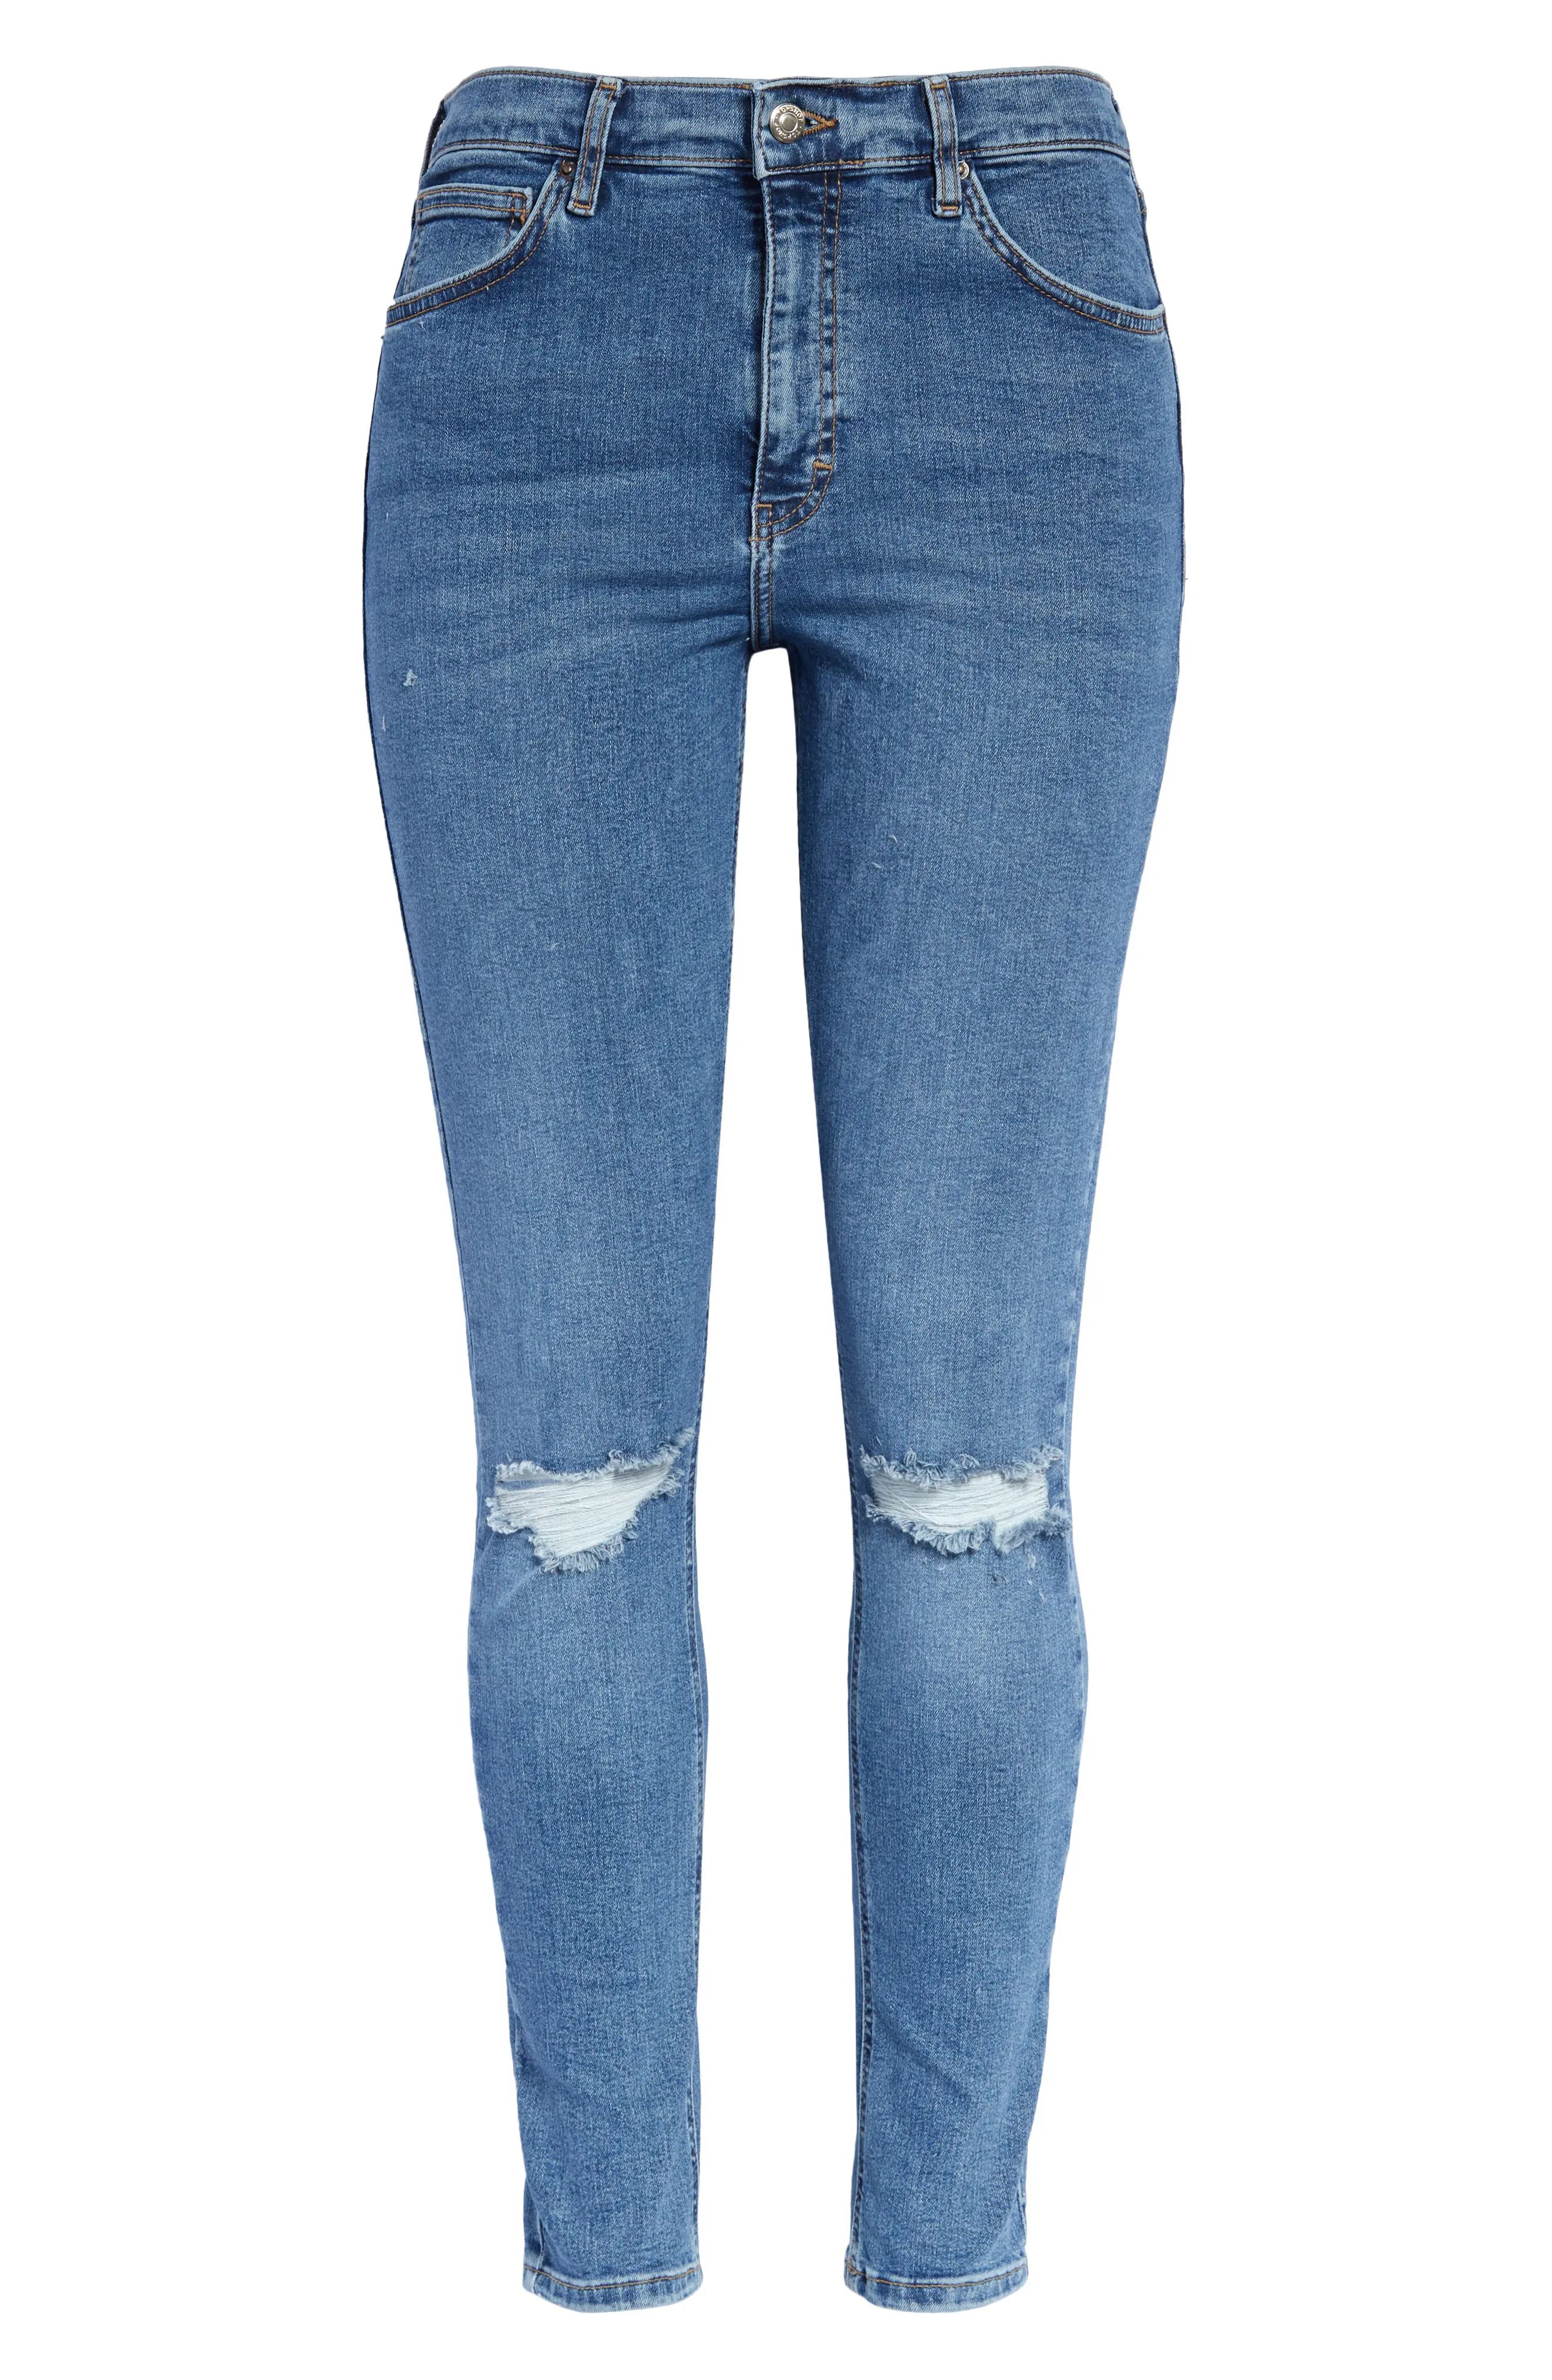 Women's Topshop Jamie Ripped Ankle Skinny Jeans, Size 27 - Blue | Nordstrom